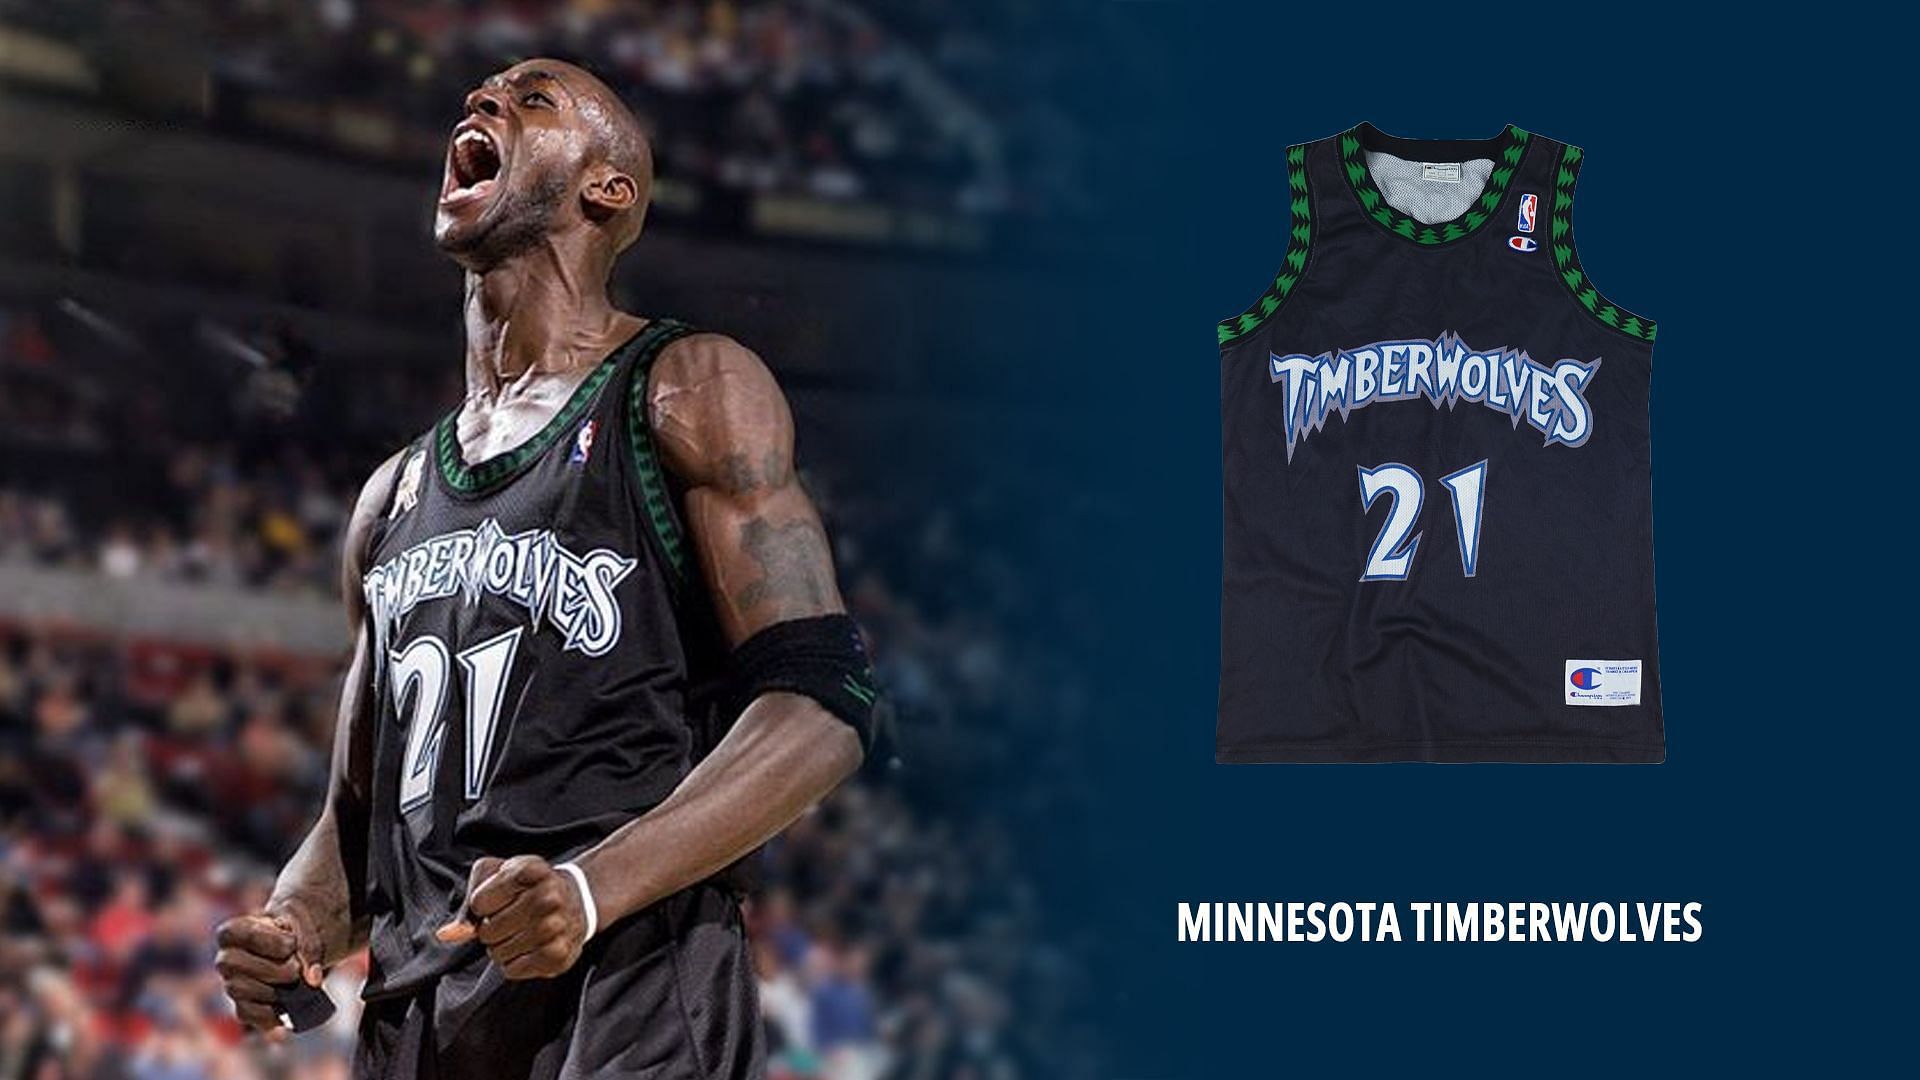 The Timberwolves had fantastic jerseys in the 2000s